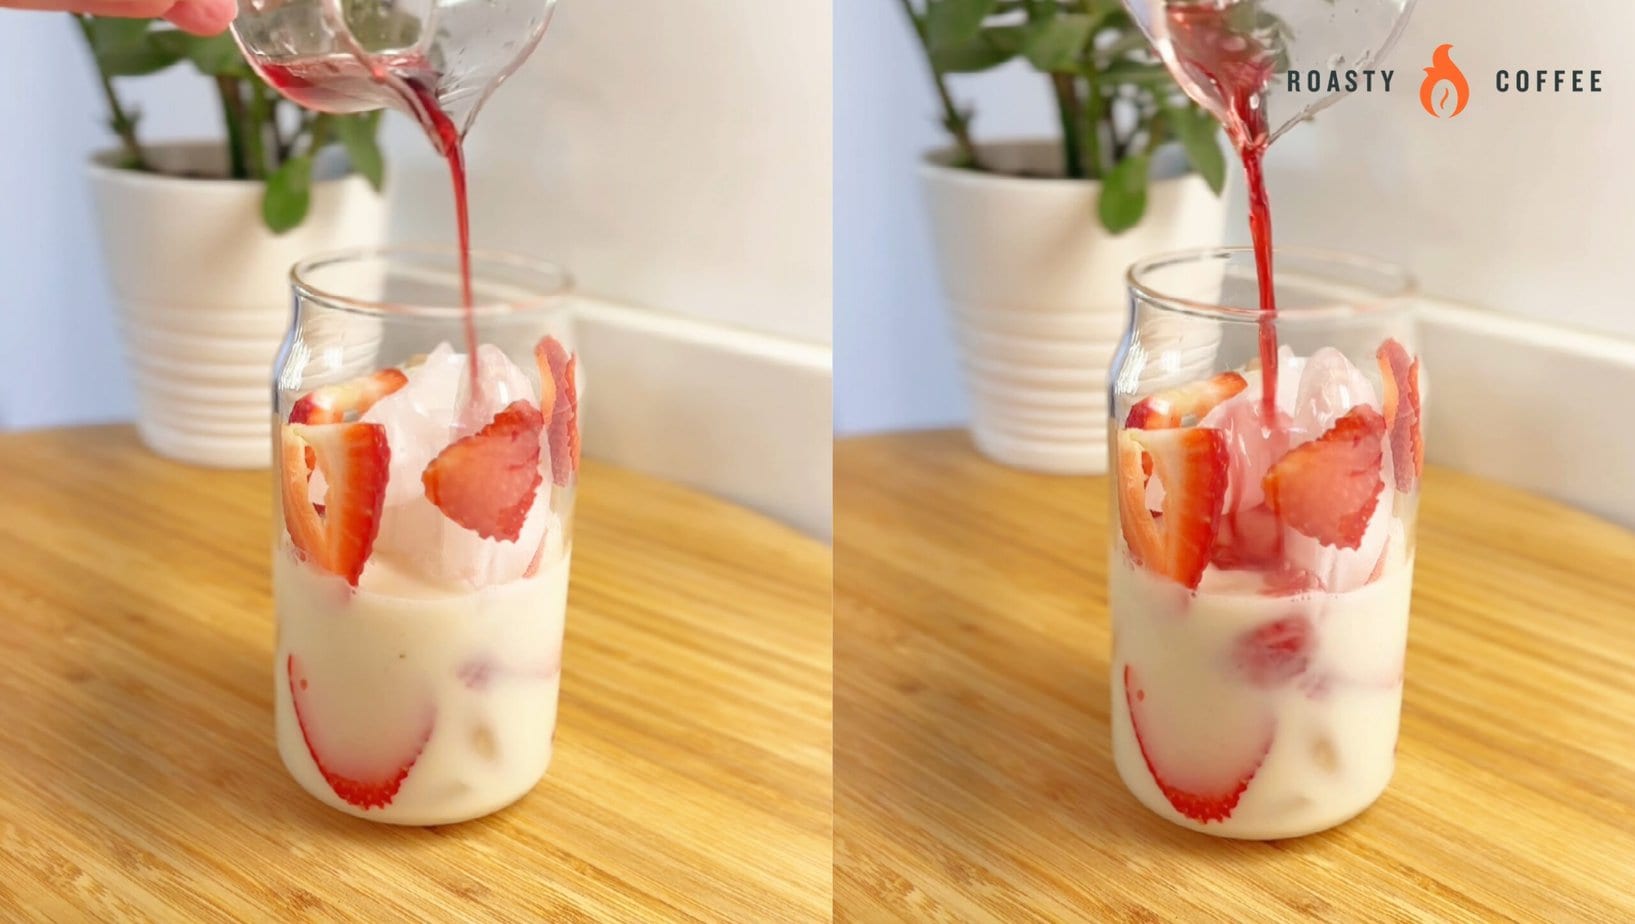 adding strawberry syrup to a glass with strawberry slices, milk and ice